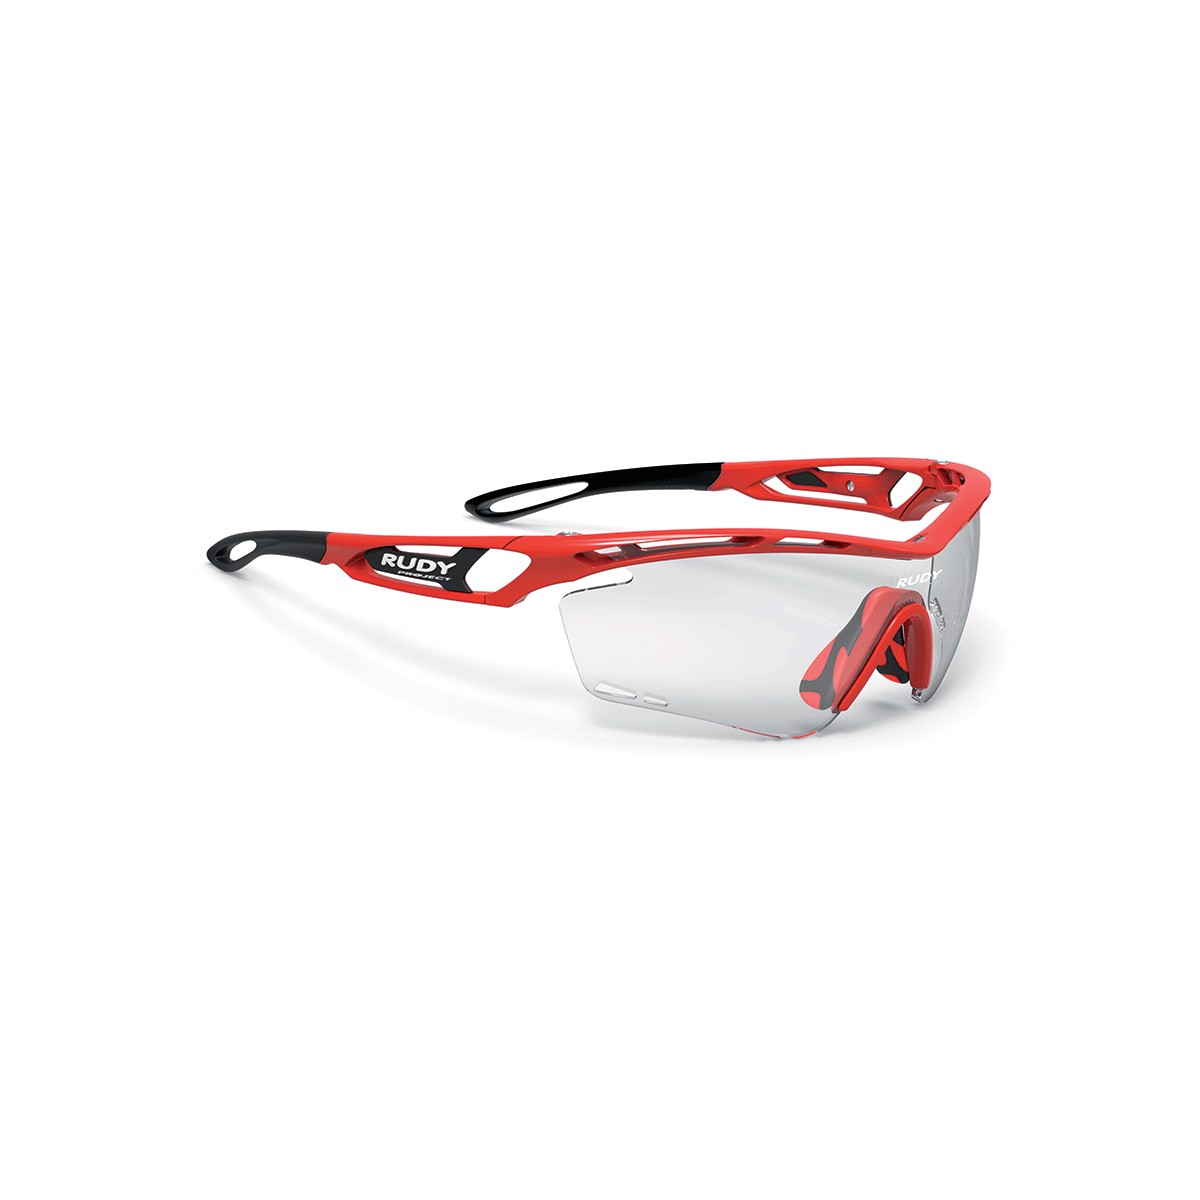 Tralyx Fire Red Gloss ImpactX 2 Schwarz Photochrome Rudy Project Sonnenbrille